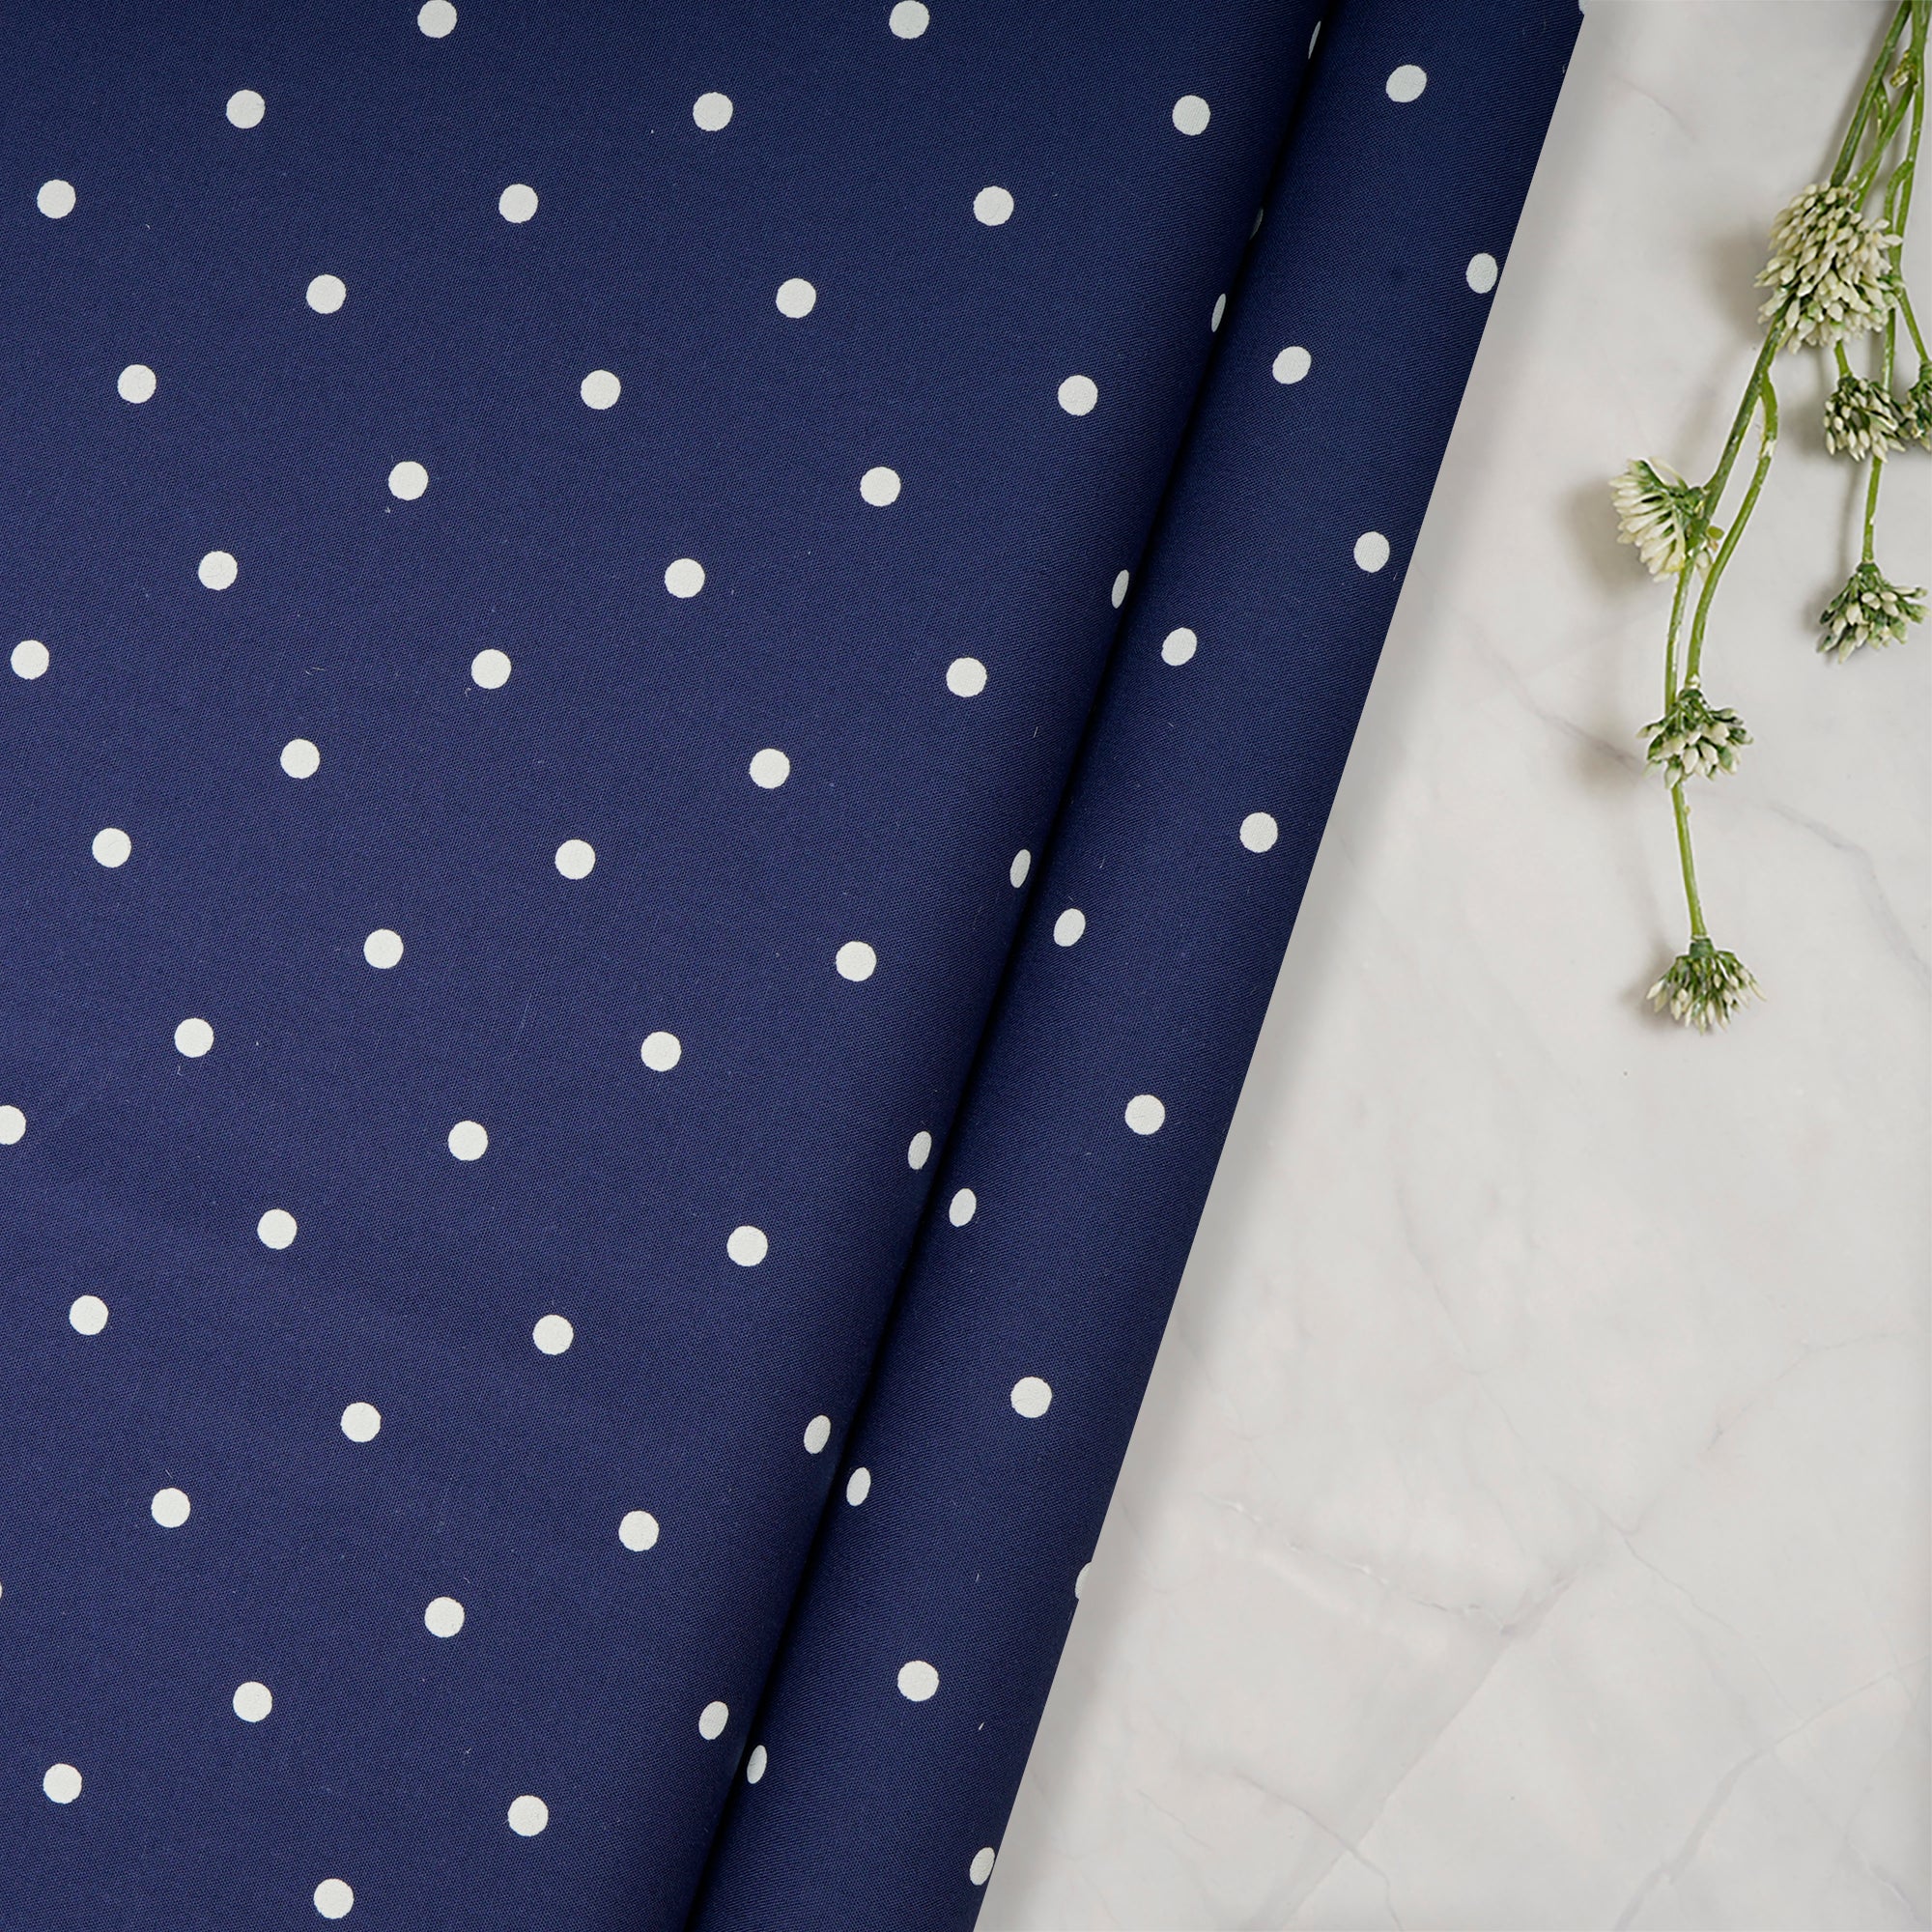 Blue-White Polka Dot Pattern Premium Cotton Printed Unstitched Men's Shirt Piece (58 Inches | 1.60 Meters)